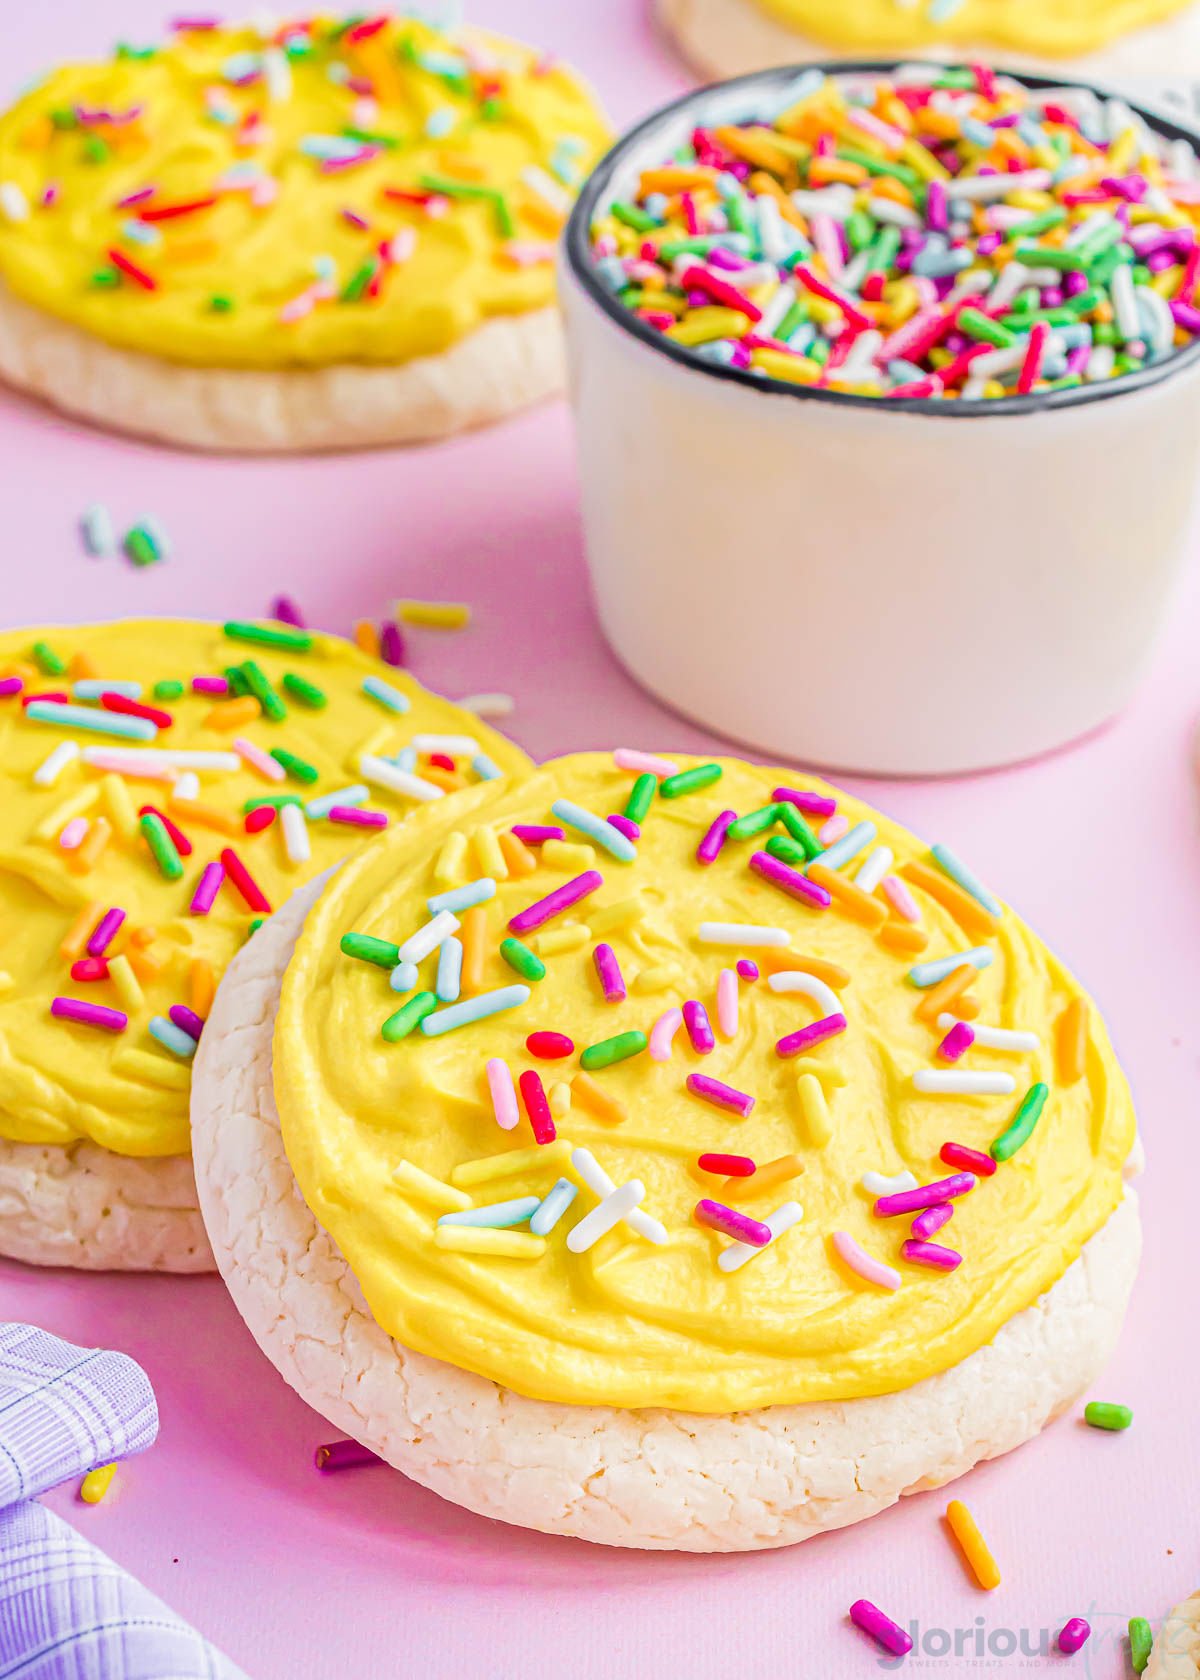 lofthouse cookies topped with bright yellow frosting and colorful jimmies. a small measuring cup filled with more sprinkles in the background.